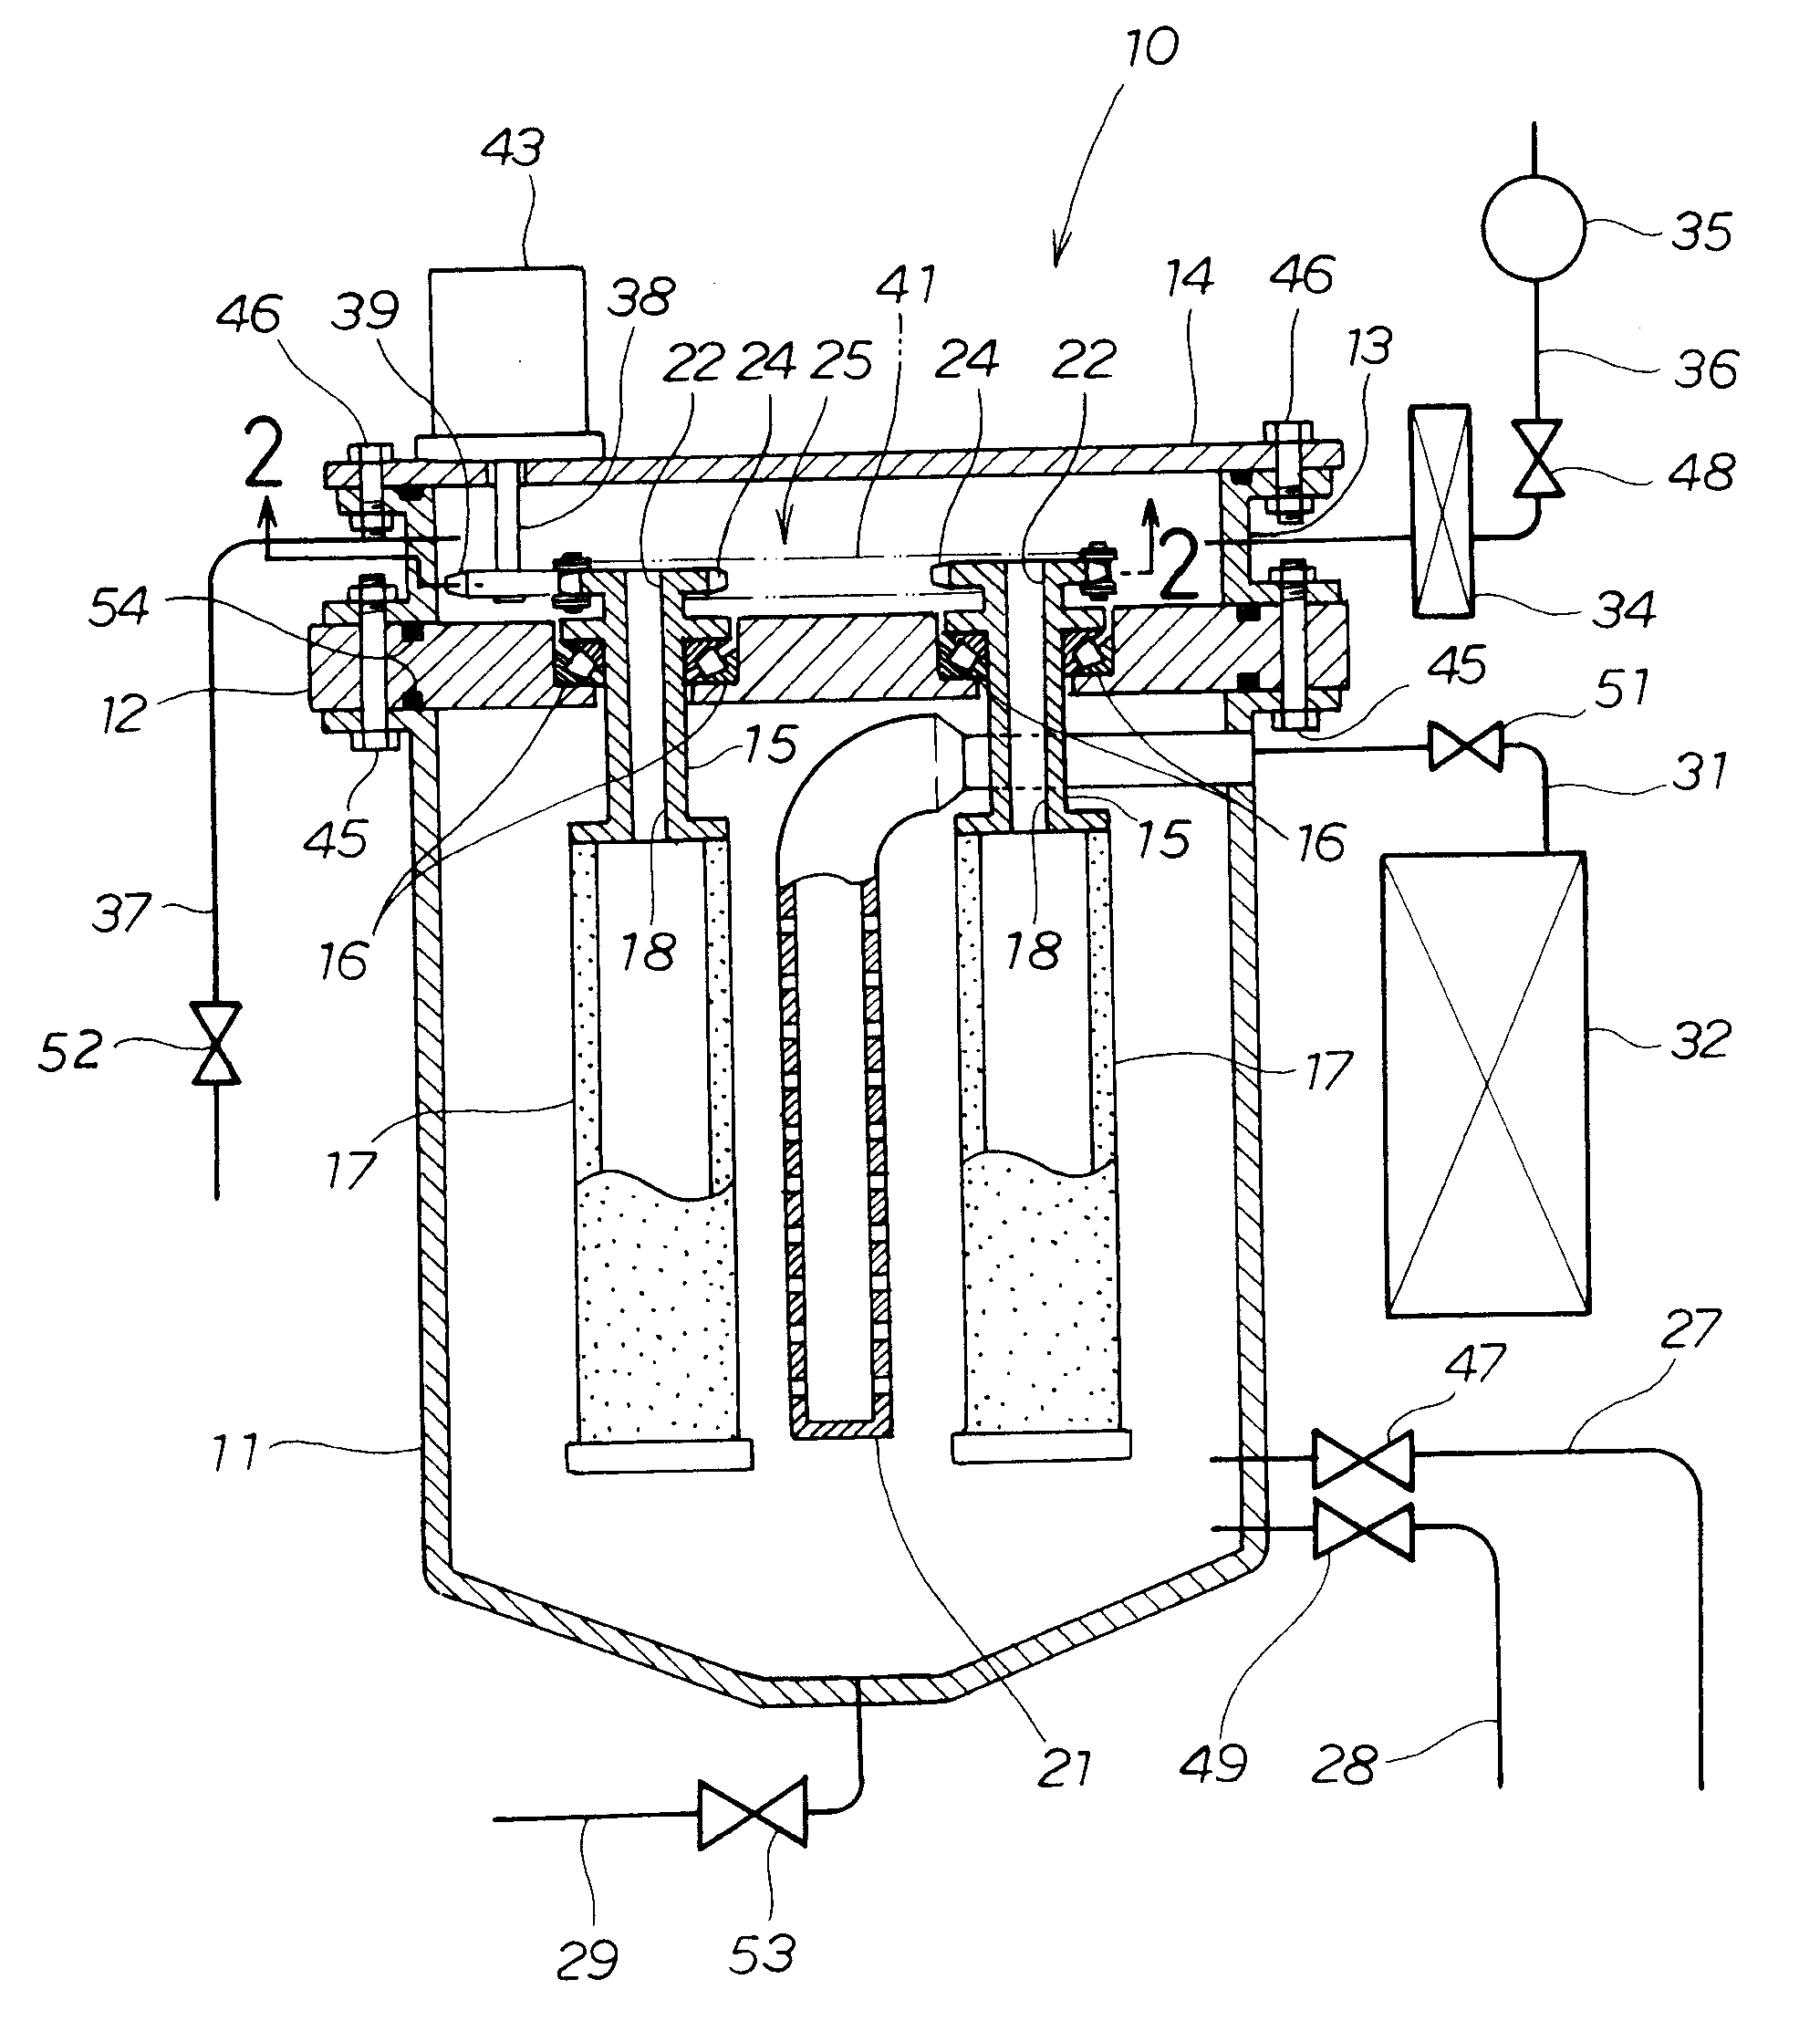 Wastewater filtering apparatus